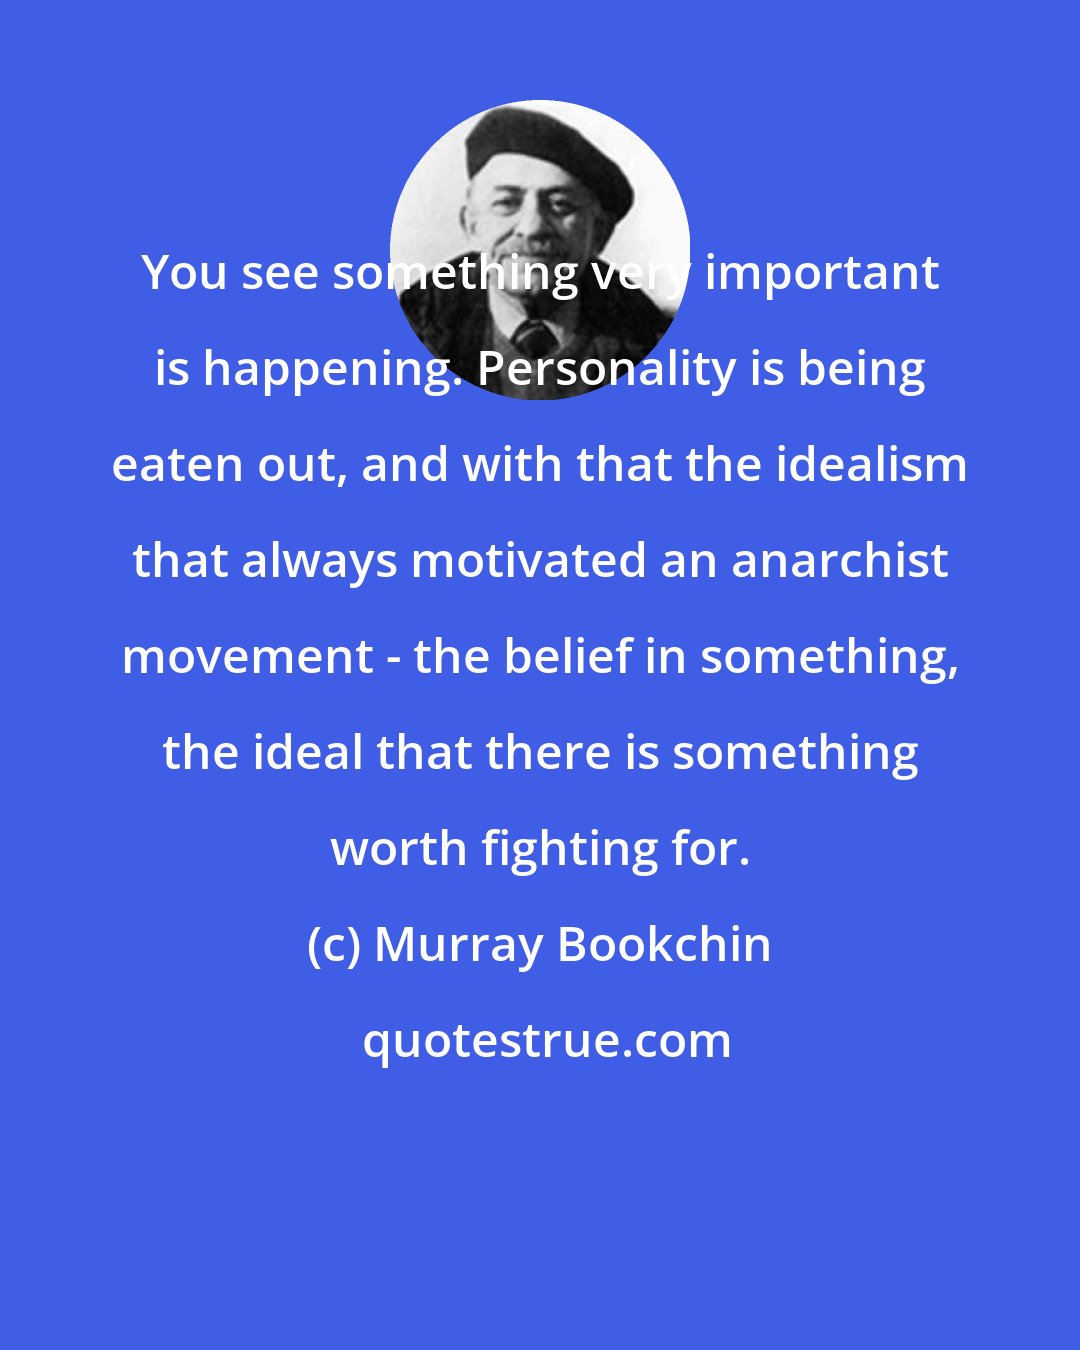 Murray Bookchin: You see something very important is happening. Personality is being eaten out, and with that the idealism that always motivated an anarchist movement - the belief in something, the ideal that there is something worth fighting for.